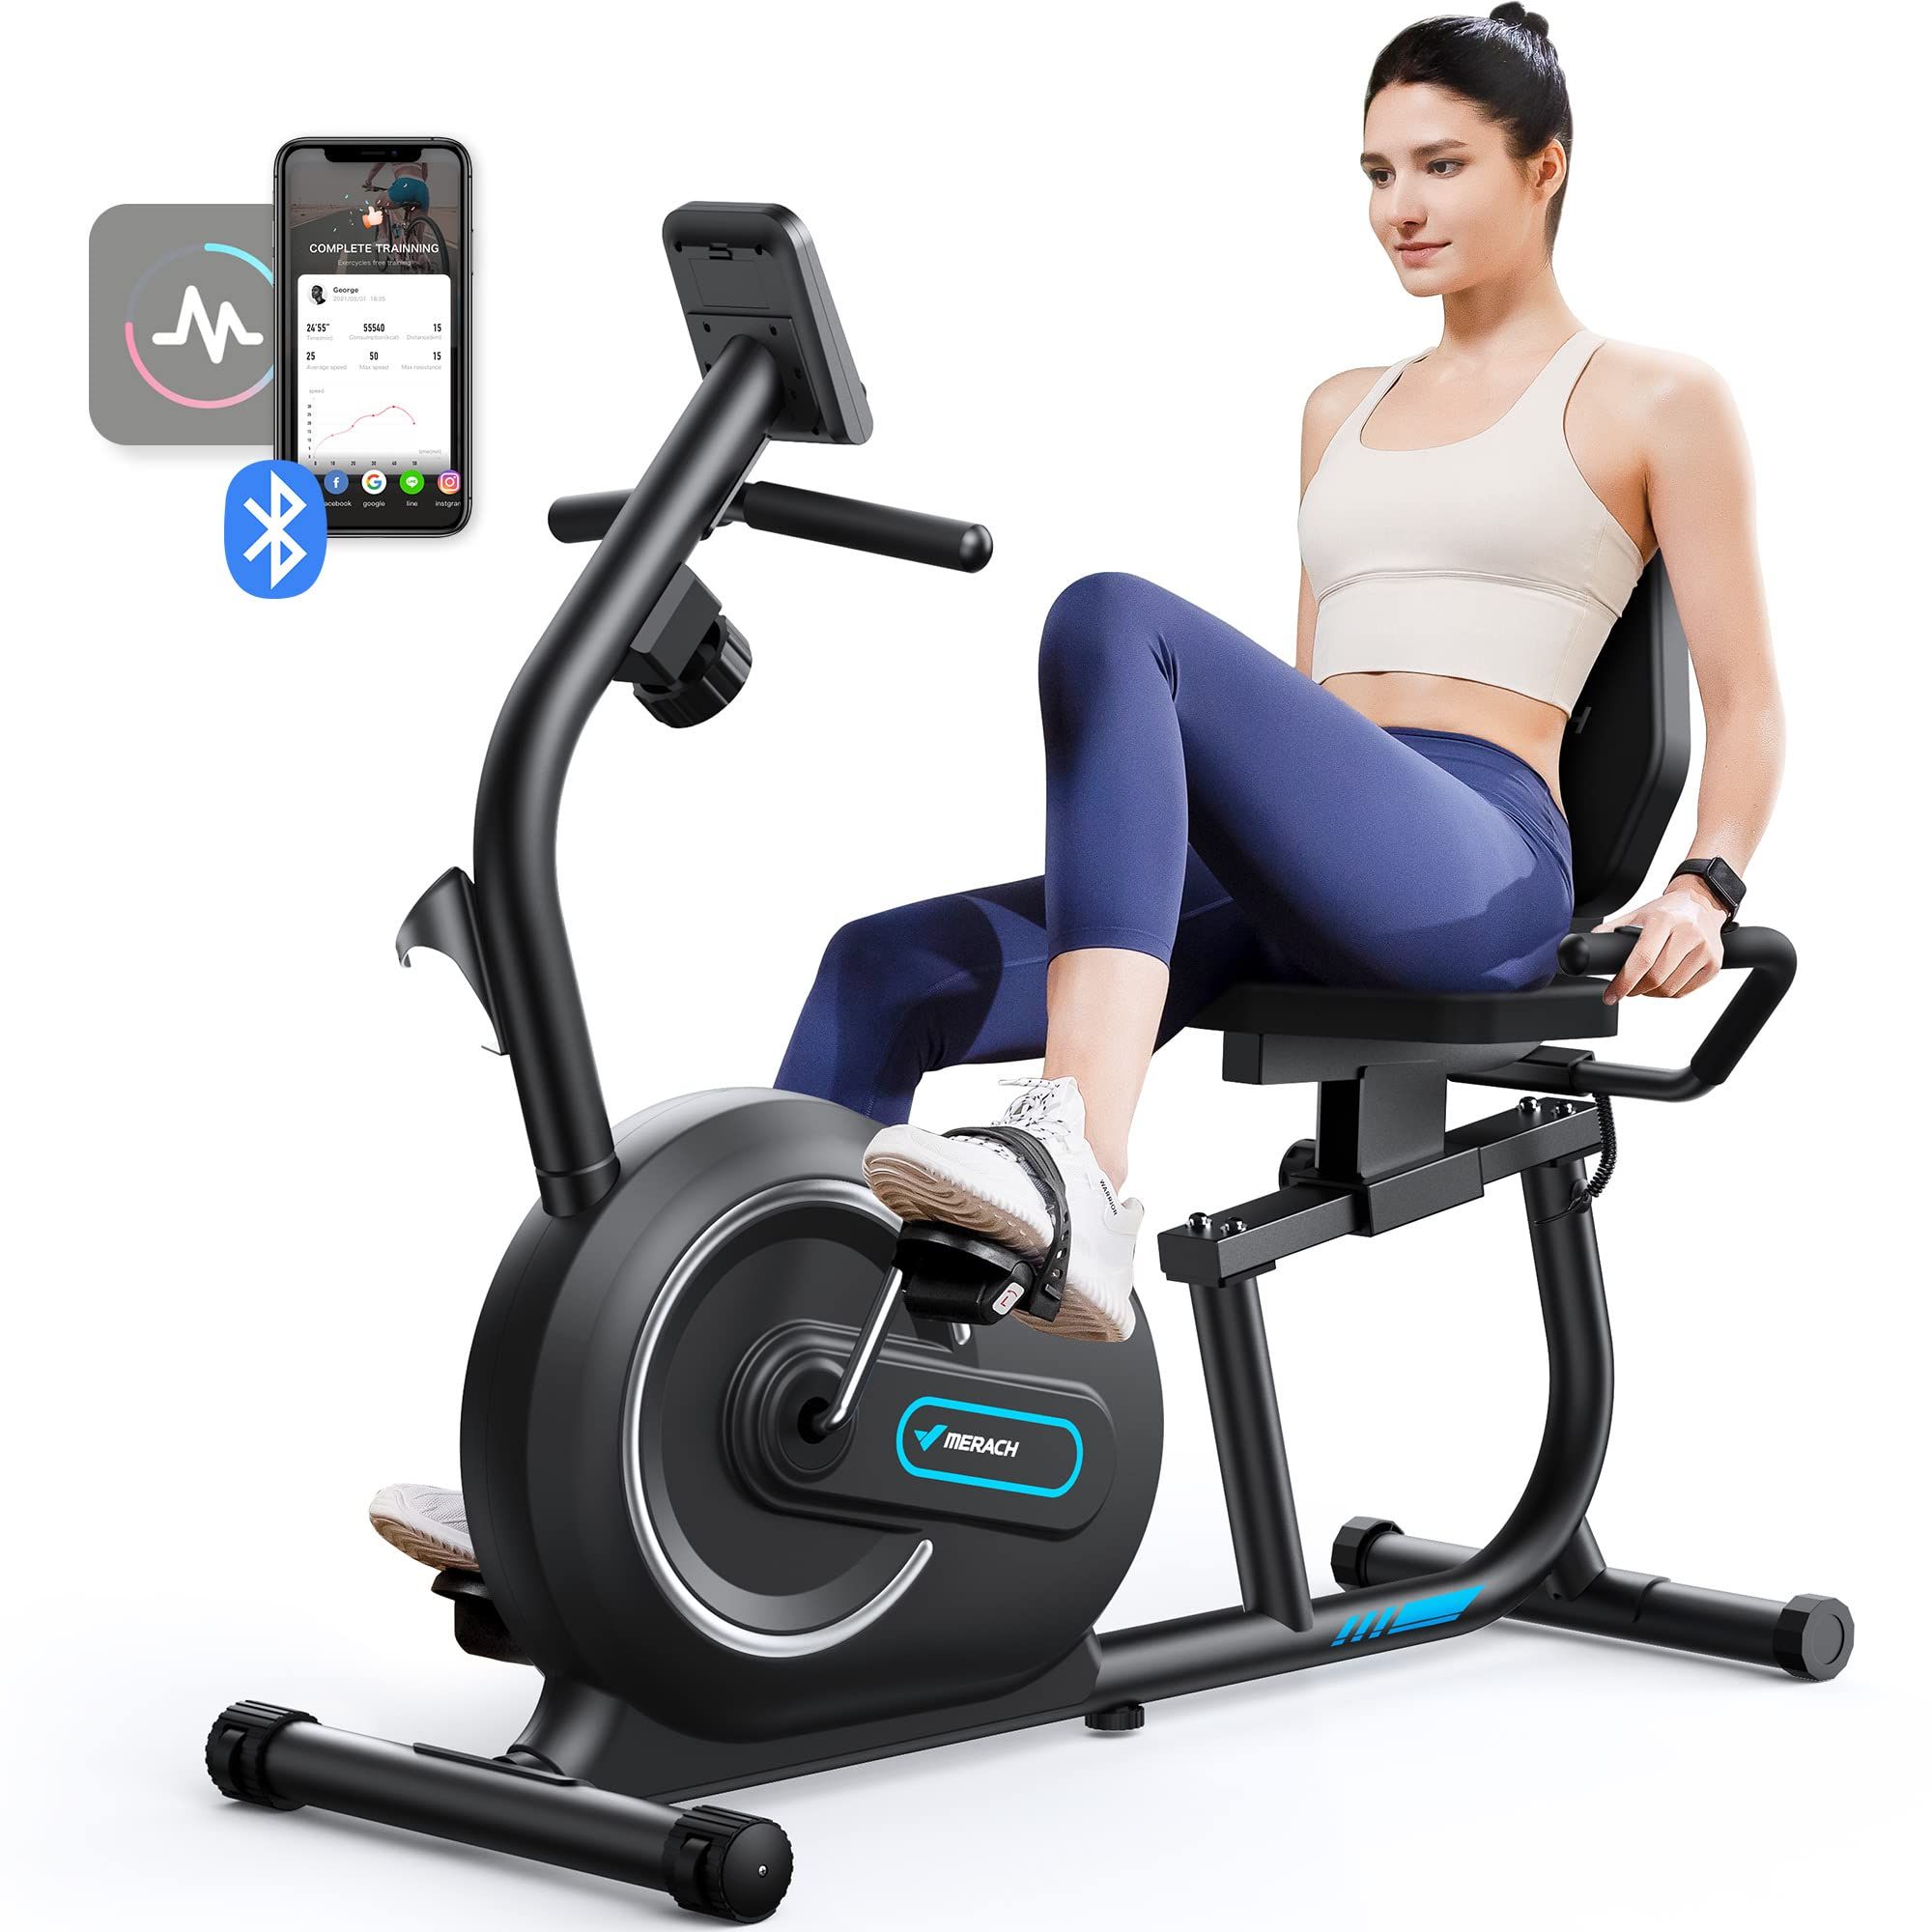 <p><strong>$259.99</strong></p><p>Some bikes can be loud, but this bike promises a quiet and productive workout. It also comes with a bottle cage to help you keep your hydration levels top of mind while you break a sweat. Plus, it has Bluetooth, so you can track your stats using the Merach app.</p><p><strong>Rave Review: </strong>"This machine is a marvel of engineering! I could not be more pleased with any product!! Do not hesitate to buy this marvelous product!! 🙏👍🤗❤️"</p>